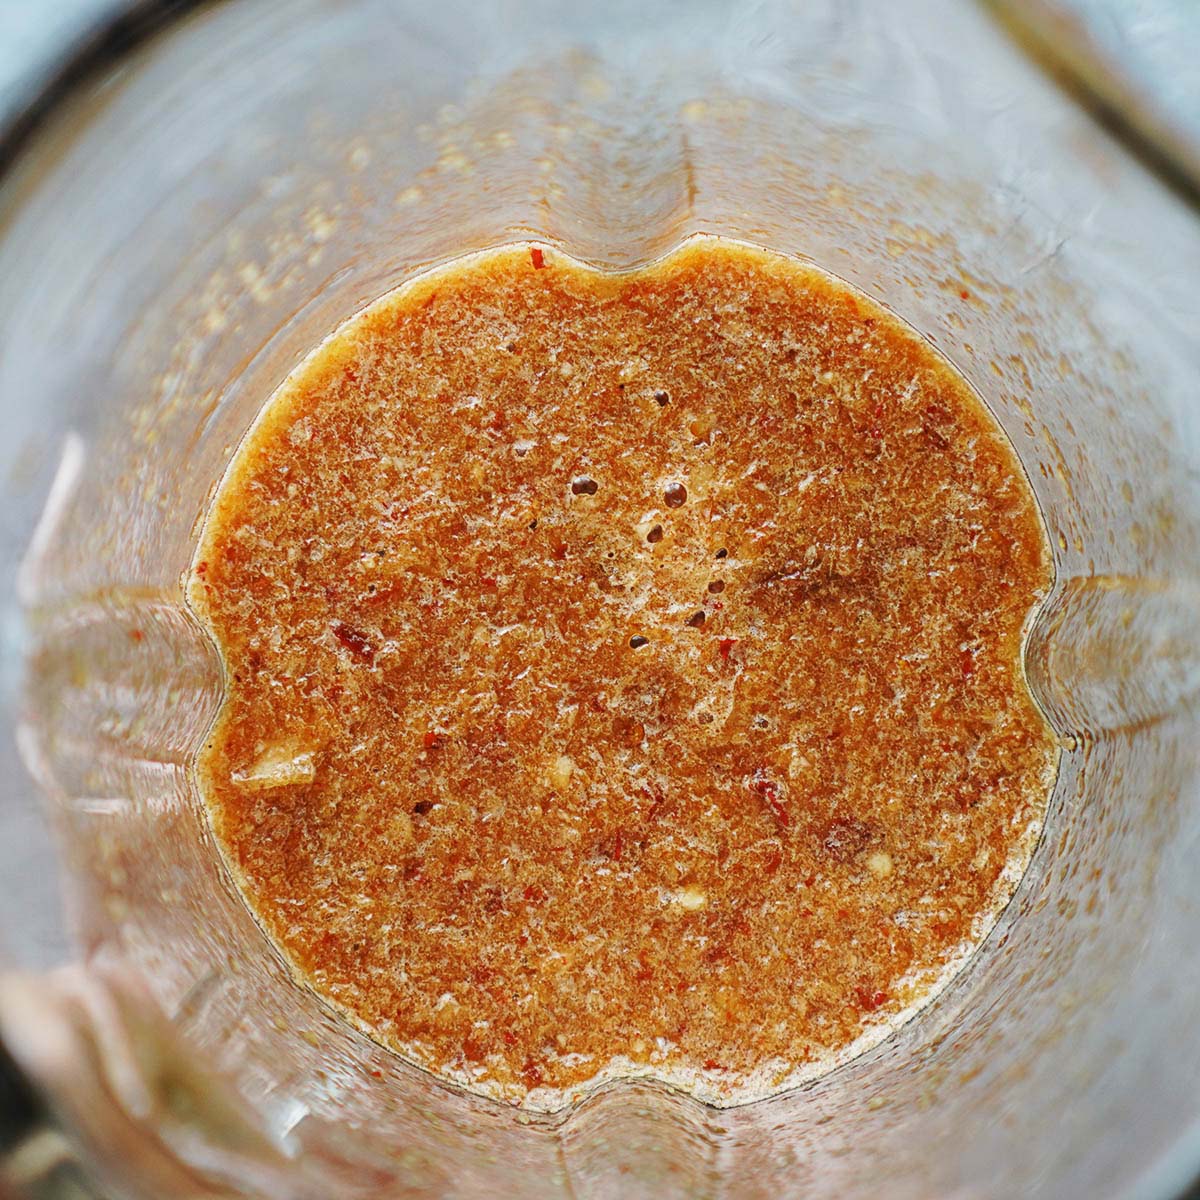 A blender with the chipotle marinade.